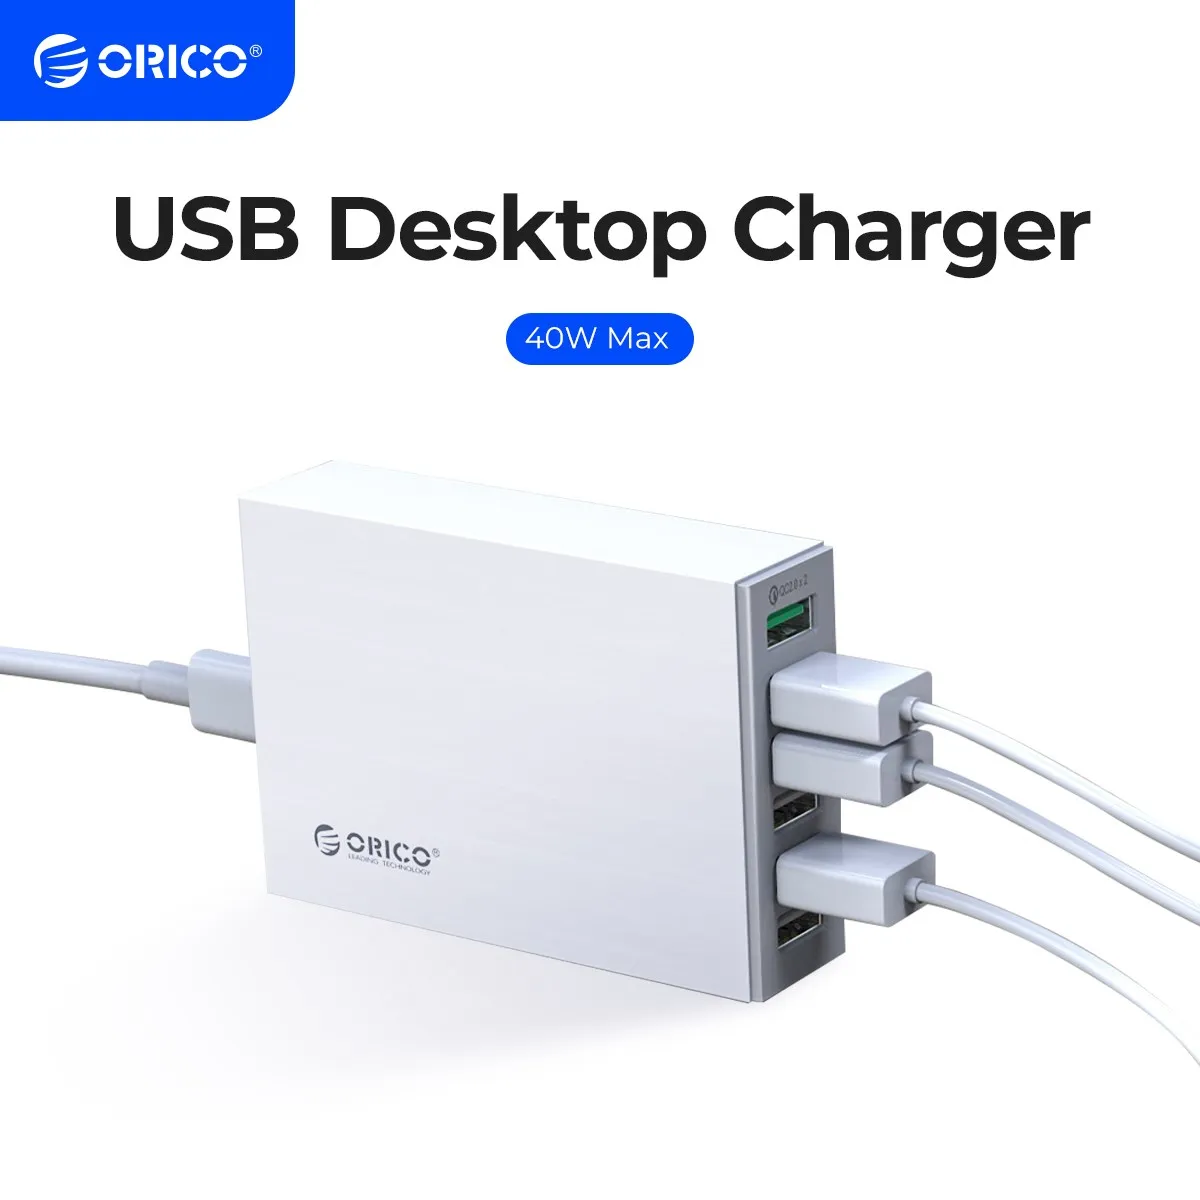 

ORICO 5 Ports QC2.0 USB Fast Charger USB Desktop Charger 40W Max Charging Station for iPhone Samsung Xiaomi Cell Phone Tablet